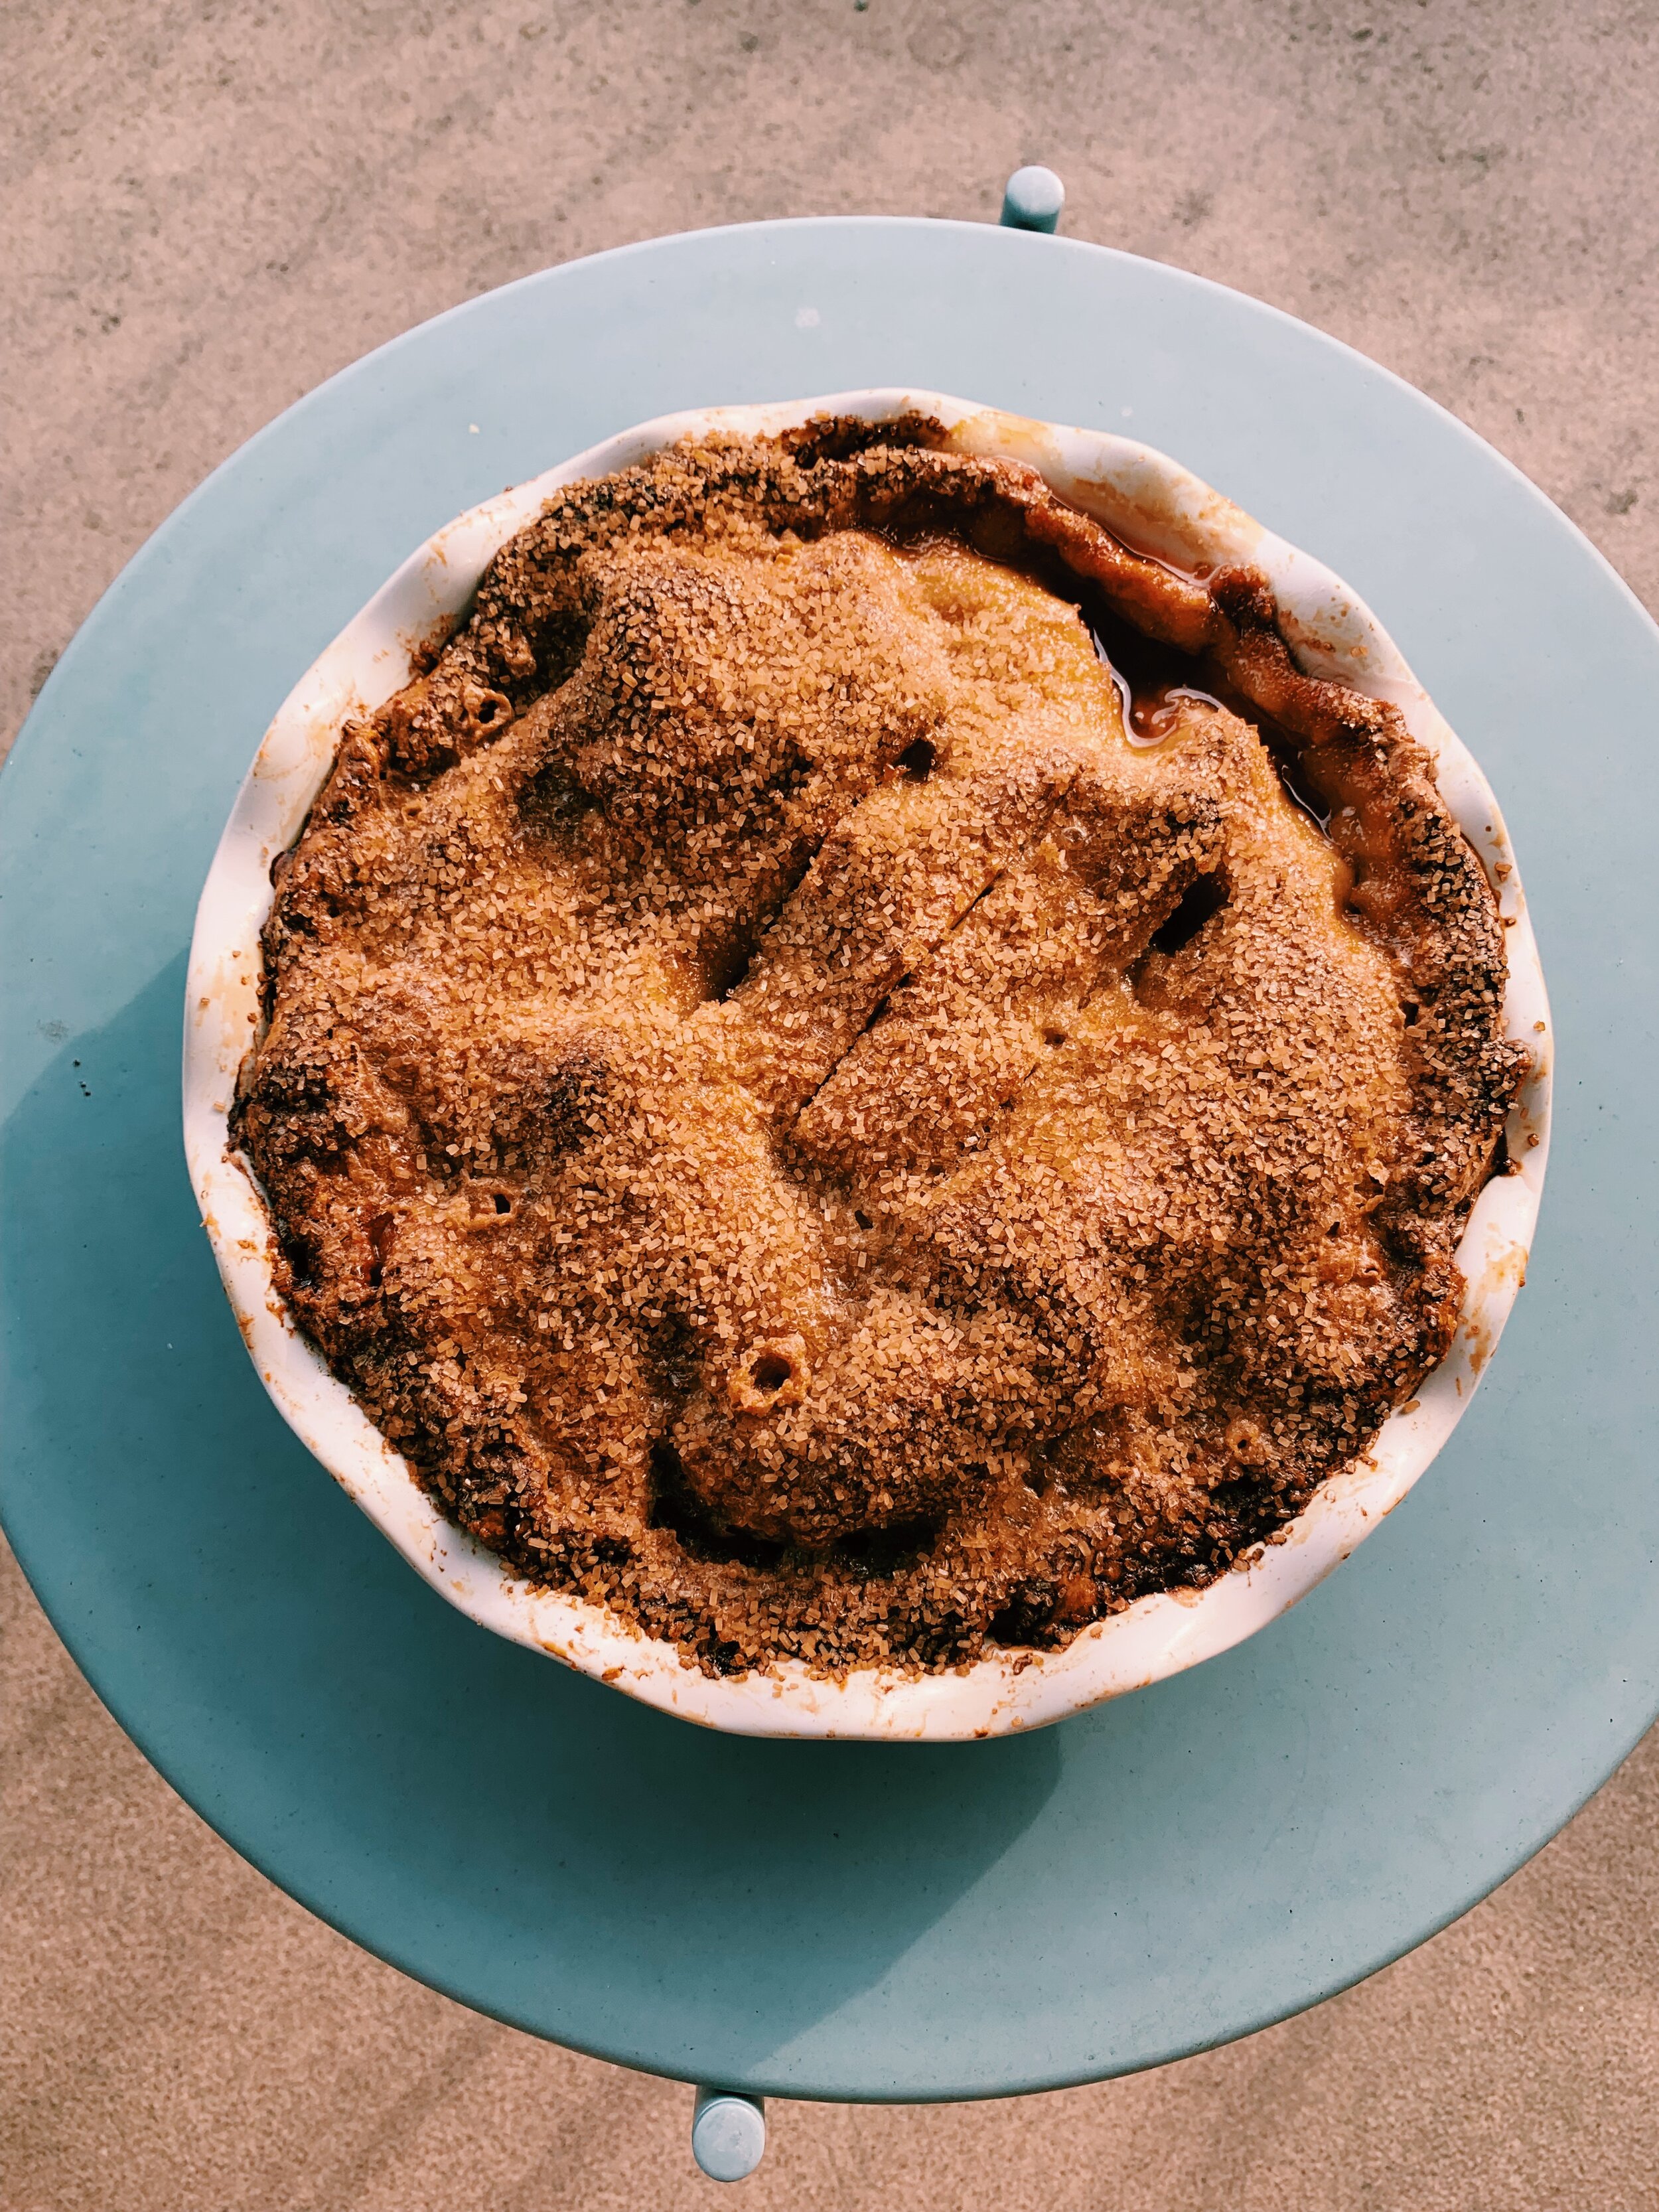 double-crusted-peach-pie-giner-honey-lime-alison-roman-1.jpg